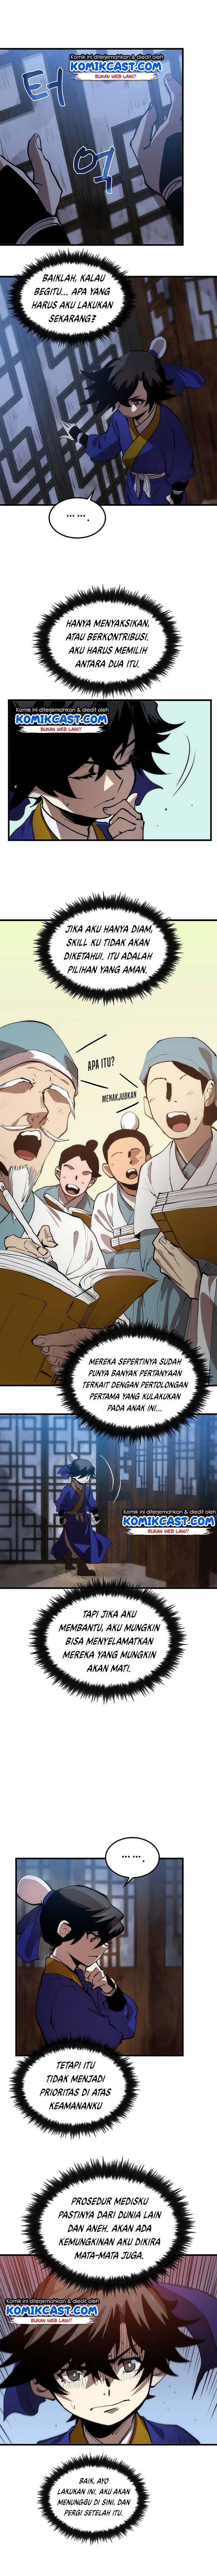 Doctor’s Rebirth Chapter 7